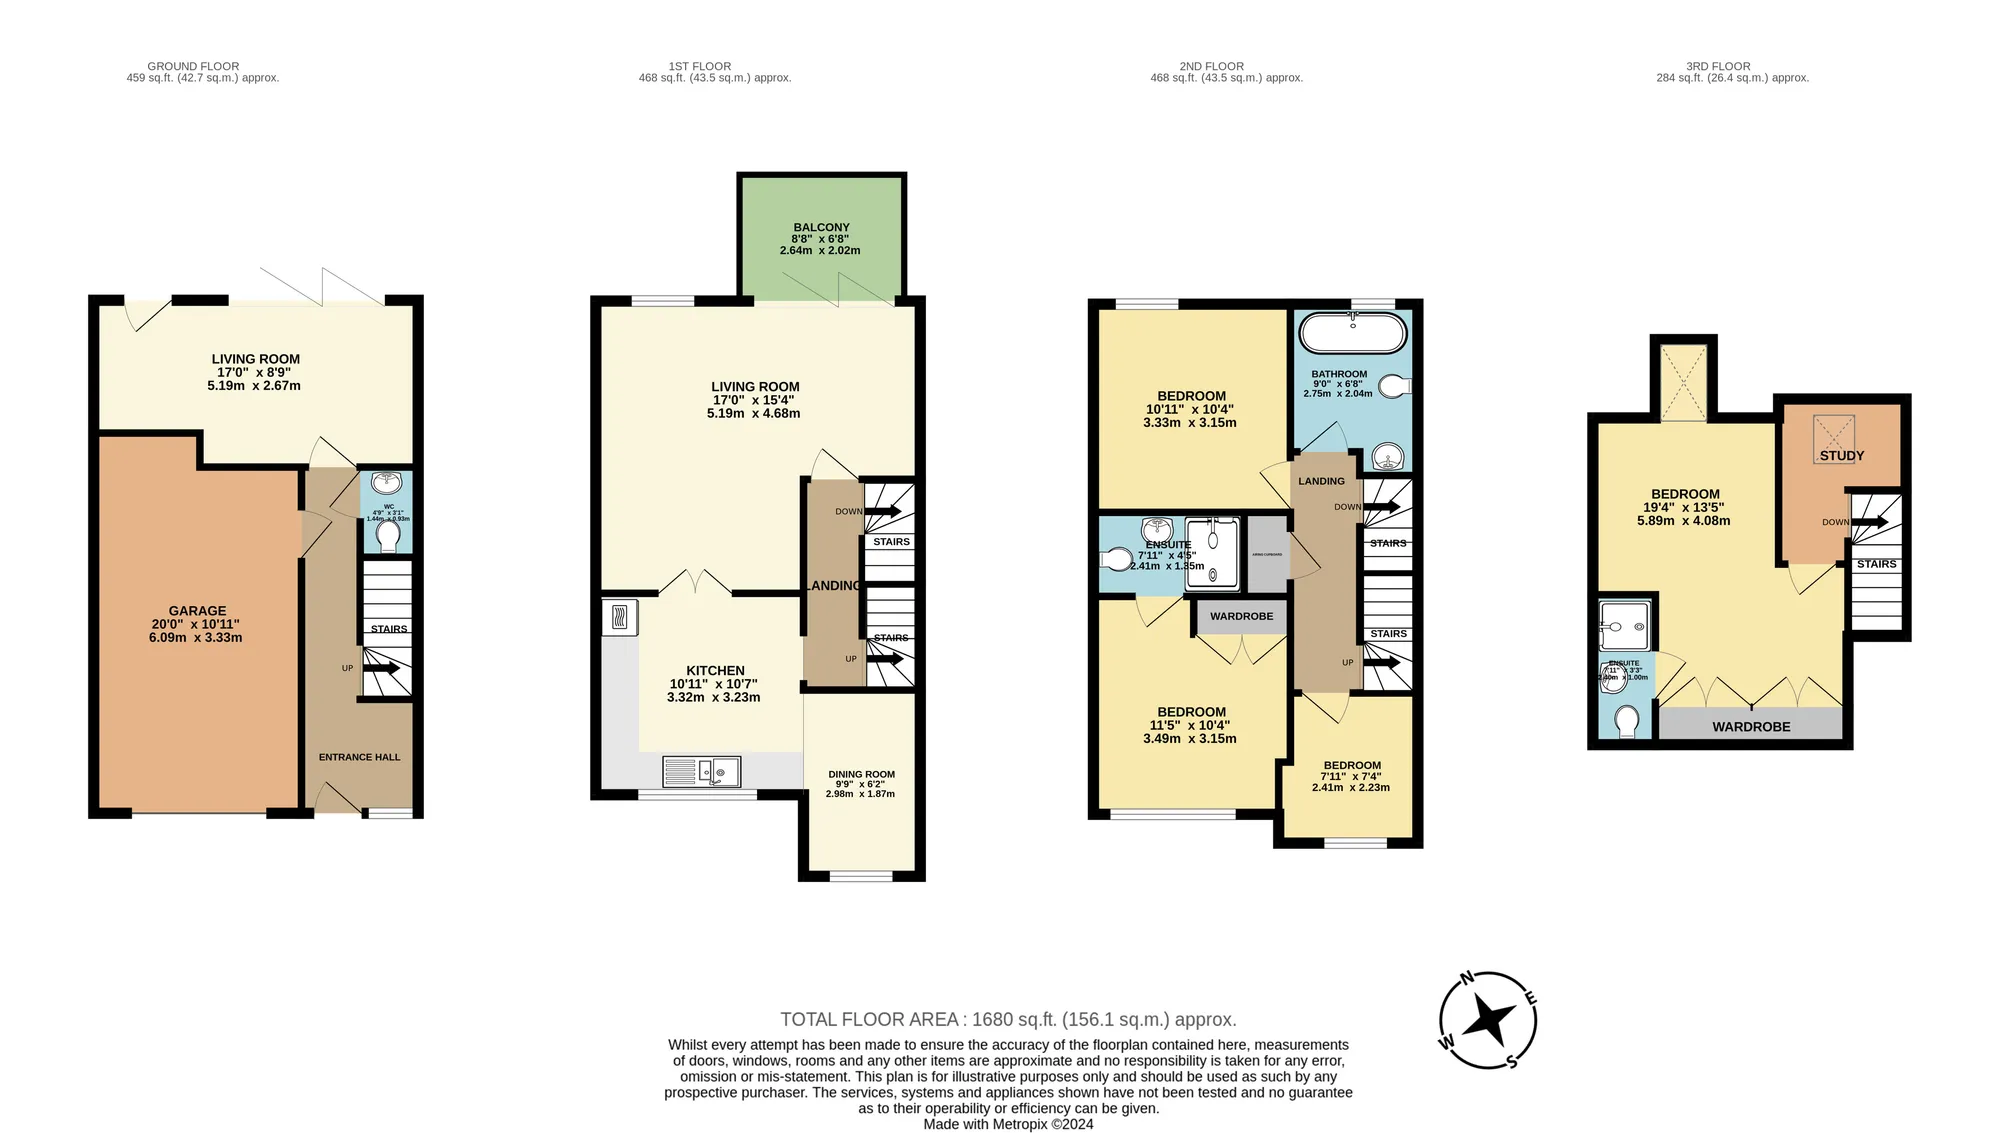 4 bed mid-terraced house for sale in Friars View, Aylesford - Property floorplan